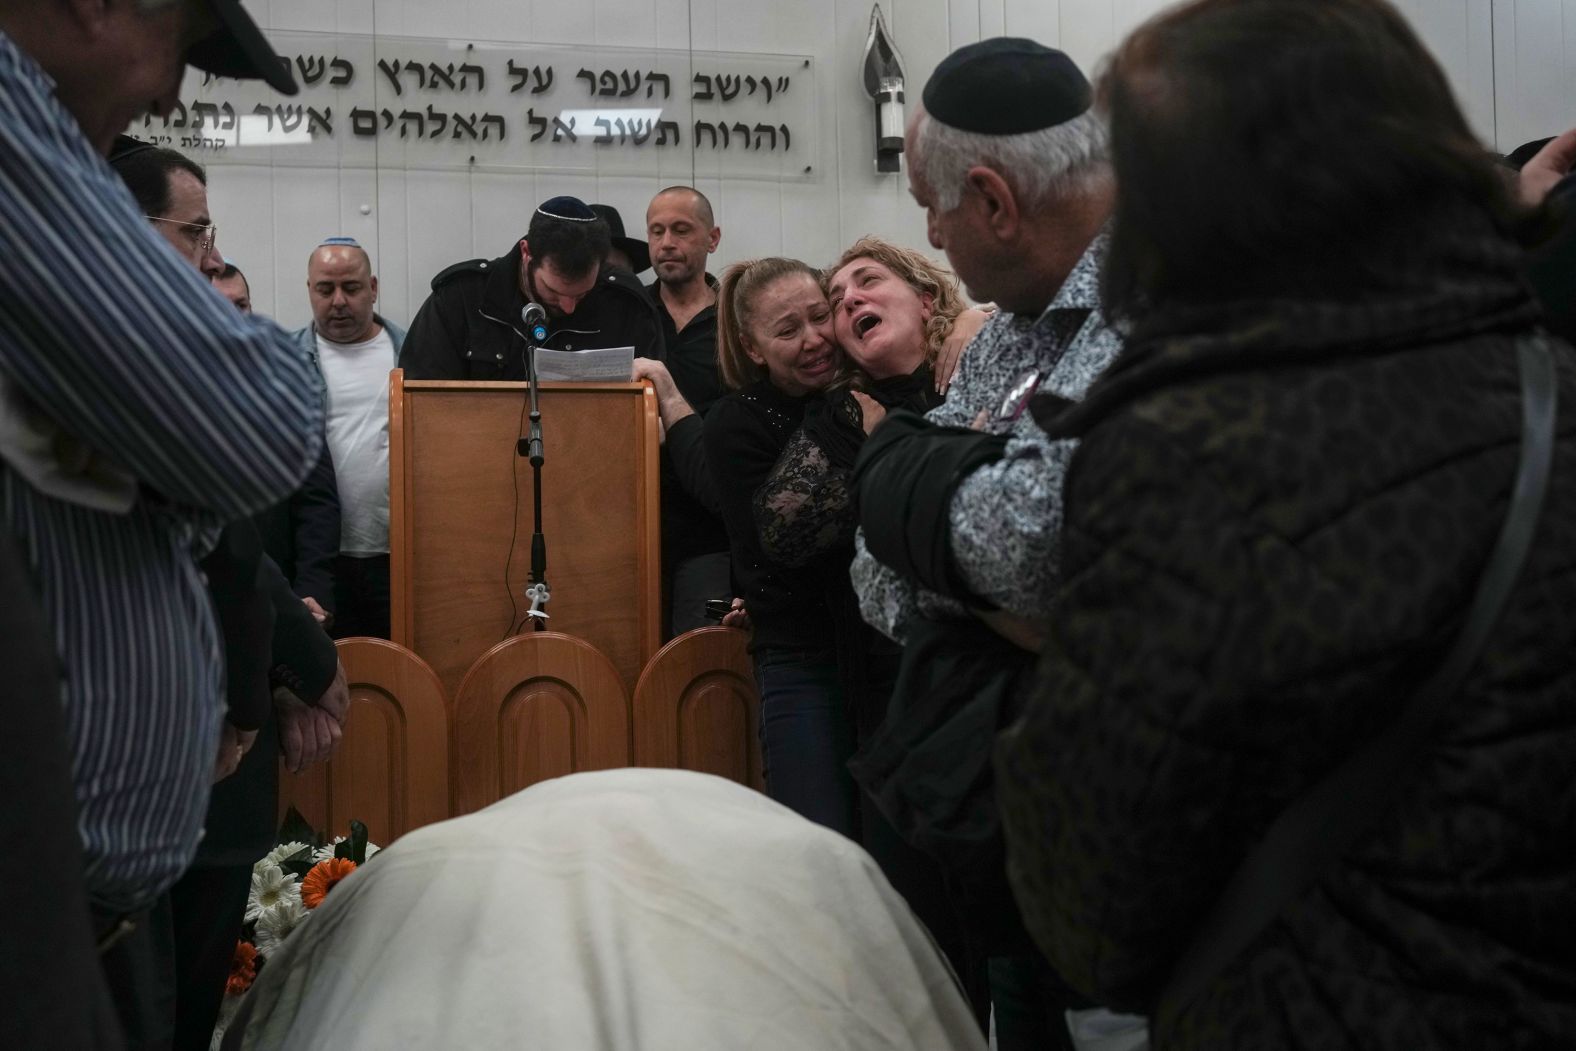 Mourners attend the funeral of Rafael Ben Eliyahu, a victim of a <a href="index.php?page=&url=https%3A%2F%2Fwww.cnn.com%2F2023%2F01%2F27%2Fmiddleeast%2Fjerusalem-shooting-dead-intl%2Findex.html" target="_blank">shooting attack in Jerusalem</a>, on Sunday, January 29. Israeli police say seven people were killed and three injured when a Palestinian gunman opened fire near a synagogue on Friday, January 27. It came amid high tensions in Israel and the Palestinian territories. The day before, Israeli forces killed nine Palestinians and wounded several others in the West Bank city of Jenin, according to the Palestinian Ministry of Health.